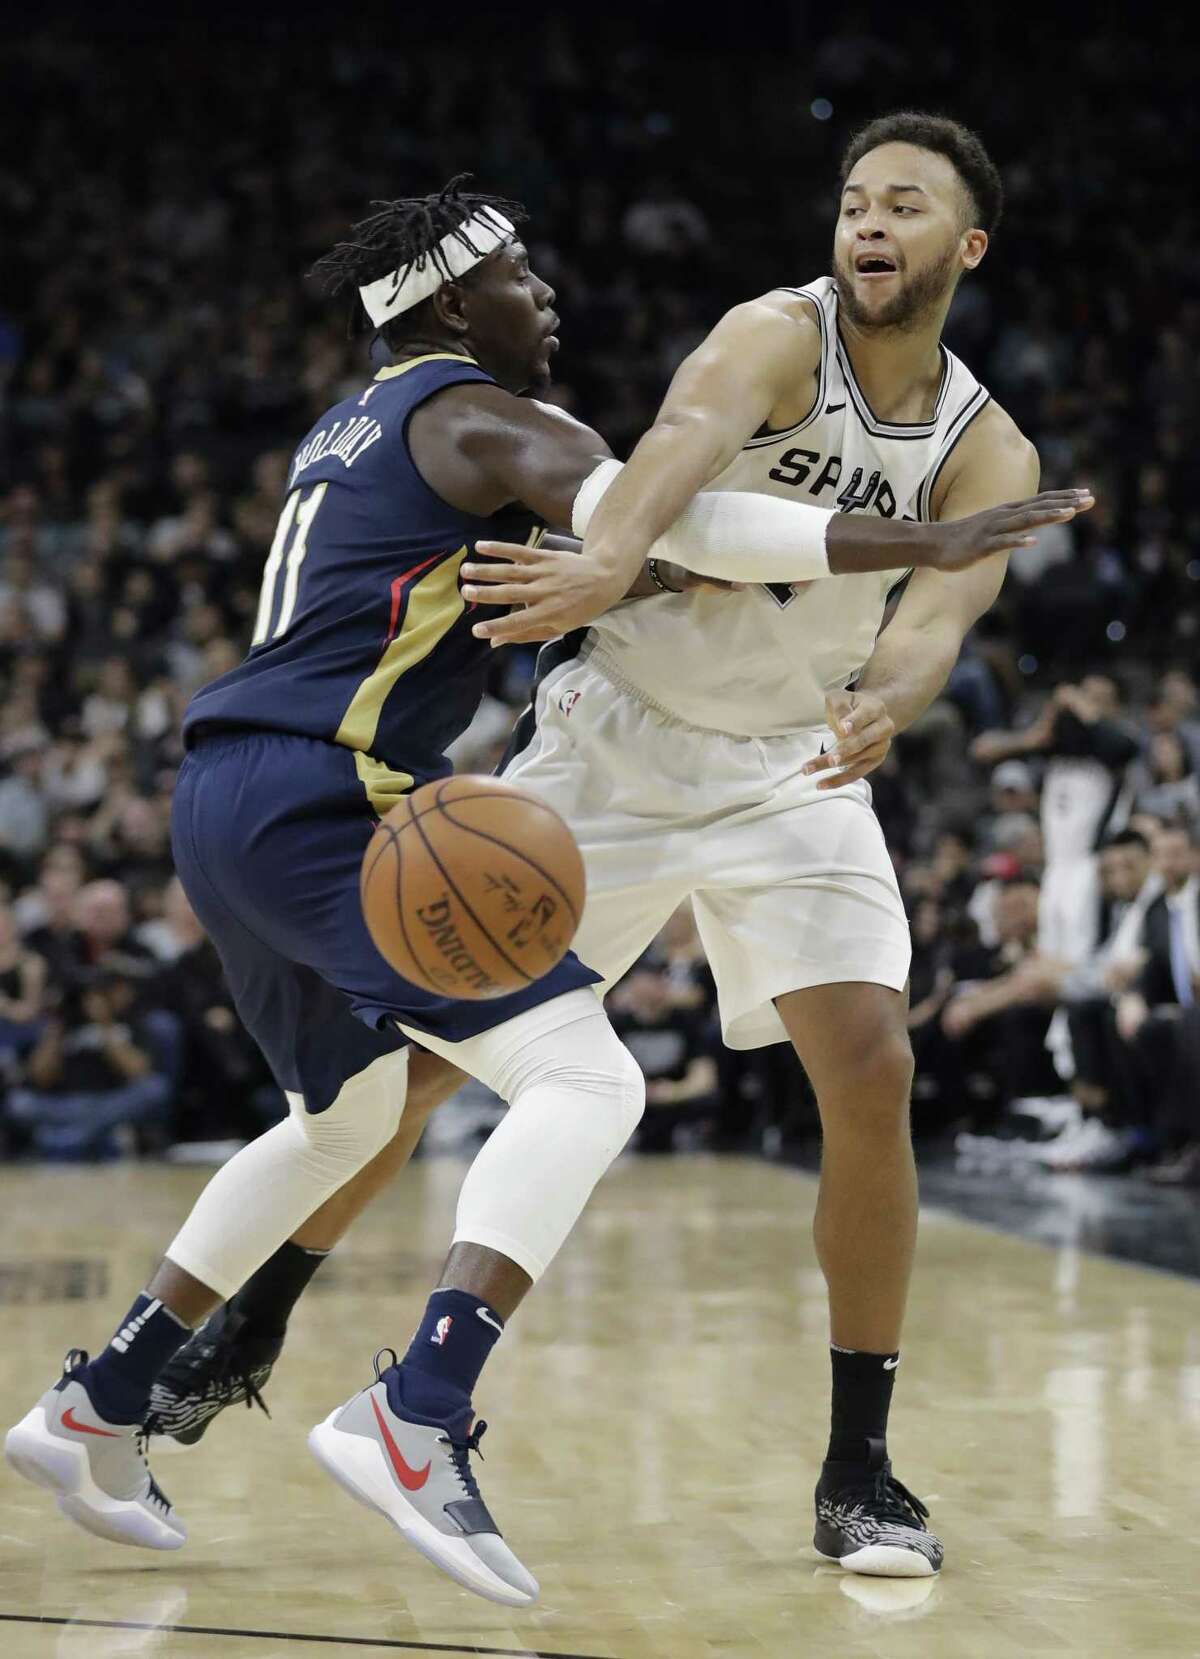 San Antonio Spurs forward Kyle Anderson (1) pass the ball around New Orleans Pelicans guard Jrue Holiday (11) during the second half of an NBA basketball game, Wednesday, Feb. 28, 2018, in San Antonio. New Orleans won 121-116. (AP Photo/Eric Gay)